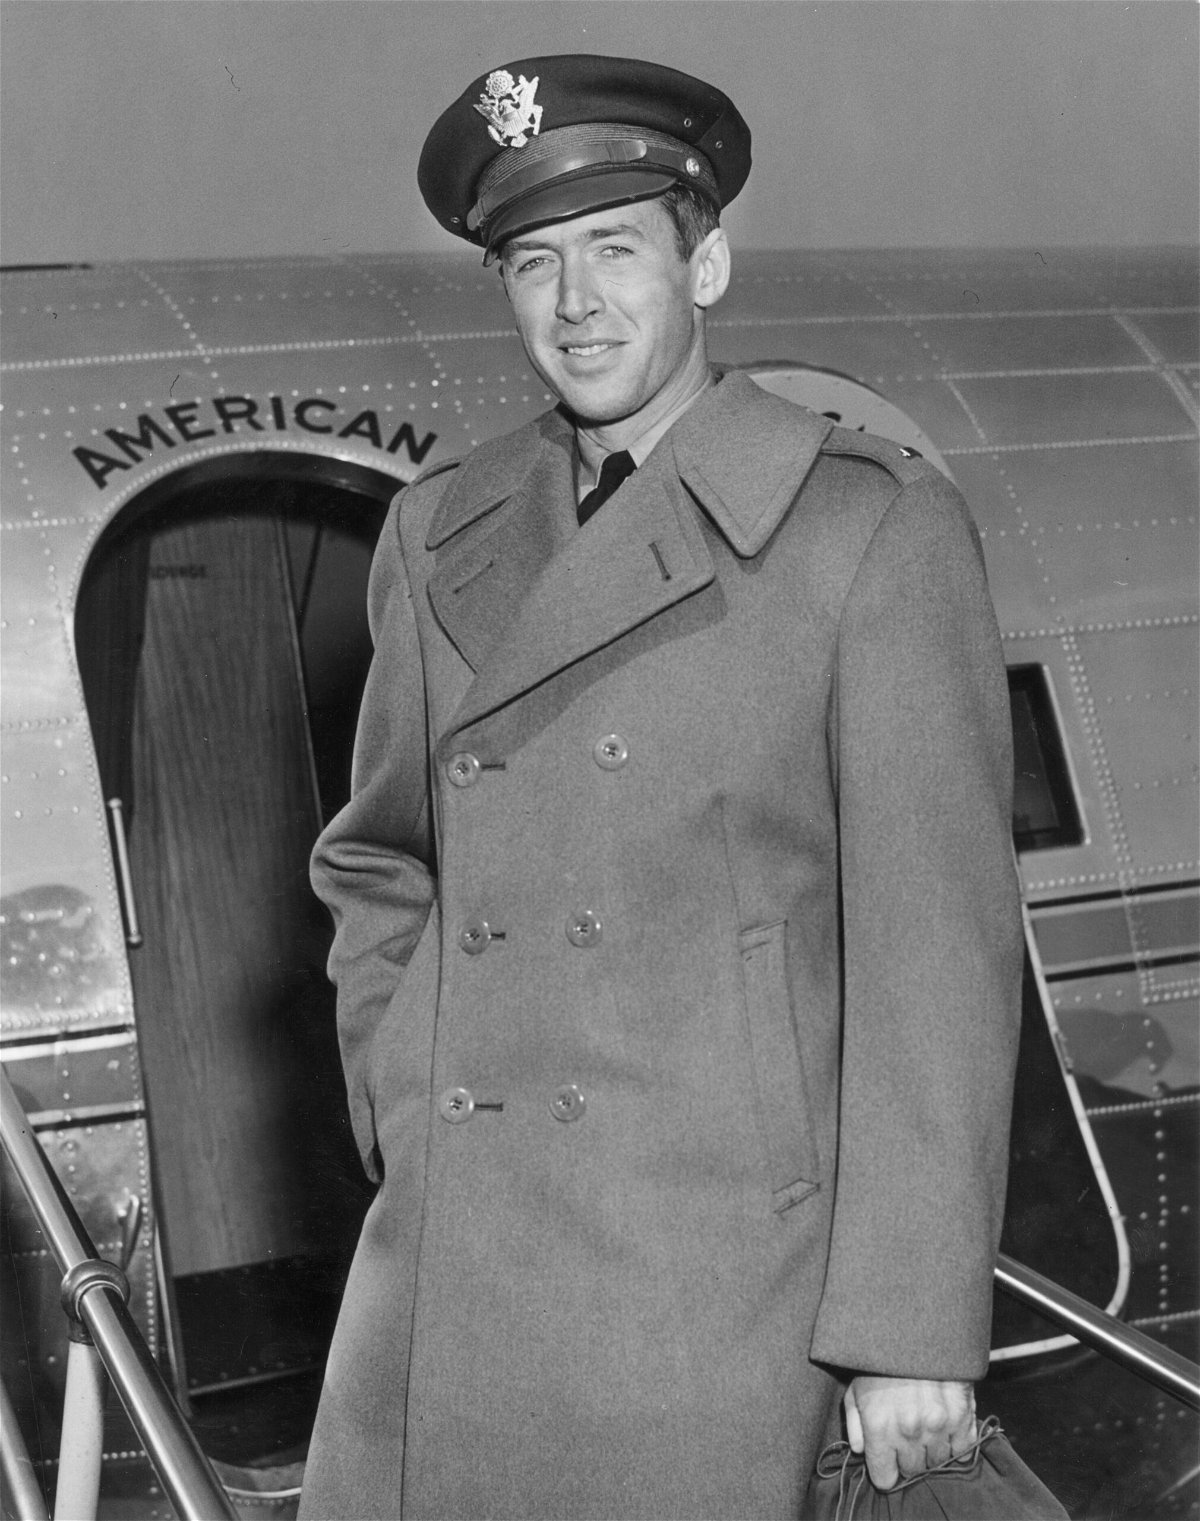 <i>Hulton Archive/Archive Photos/Getty Images</i><br/>Stewart in the early 1940s with his Air Force cap in front of a military plane.